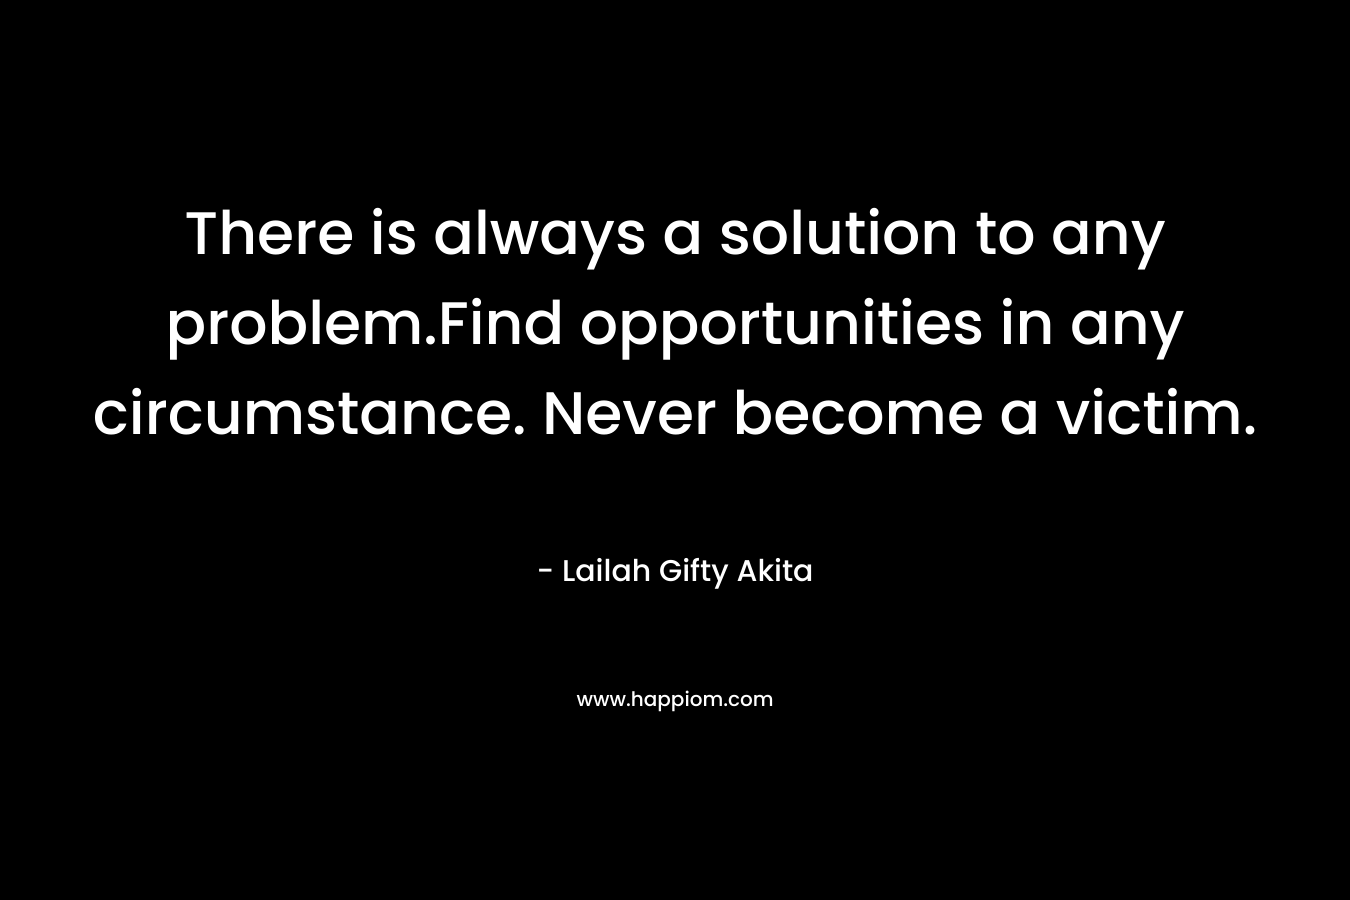 There is always a solution to any problem.Find opportunities in any circumstance. Never become a victim.